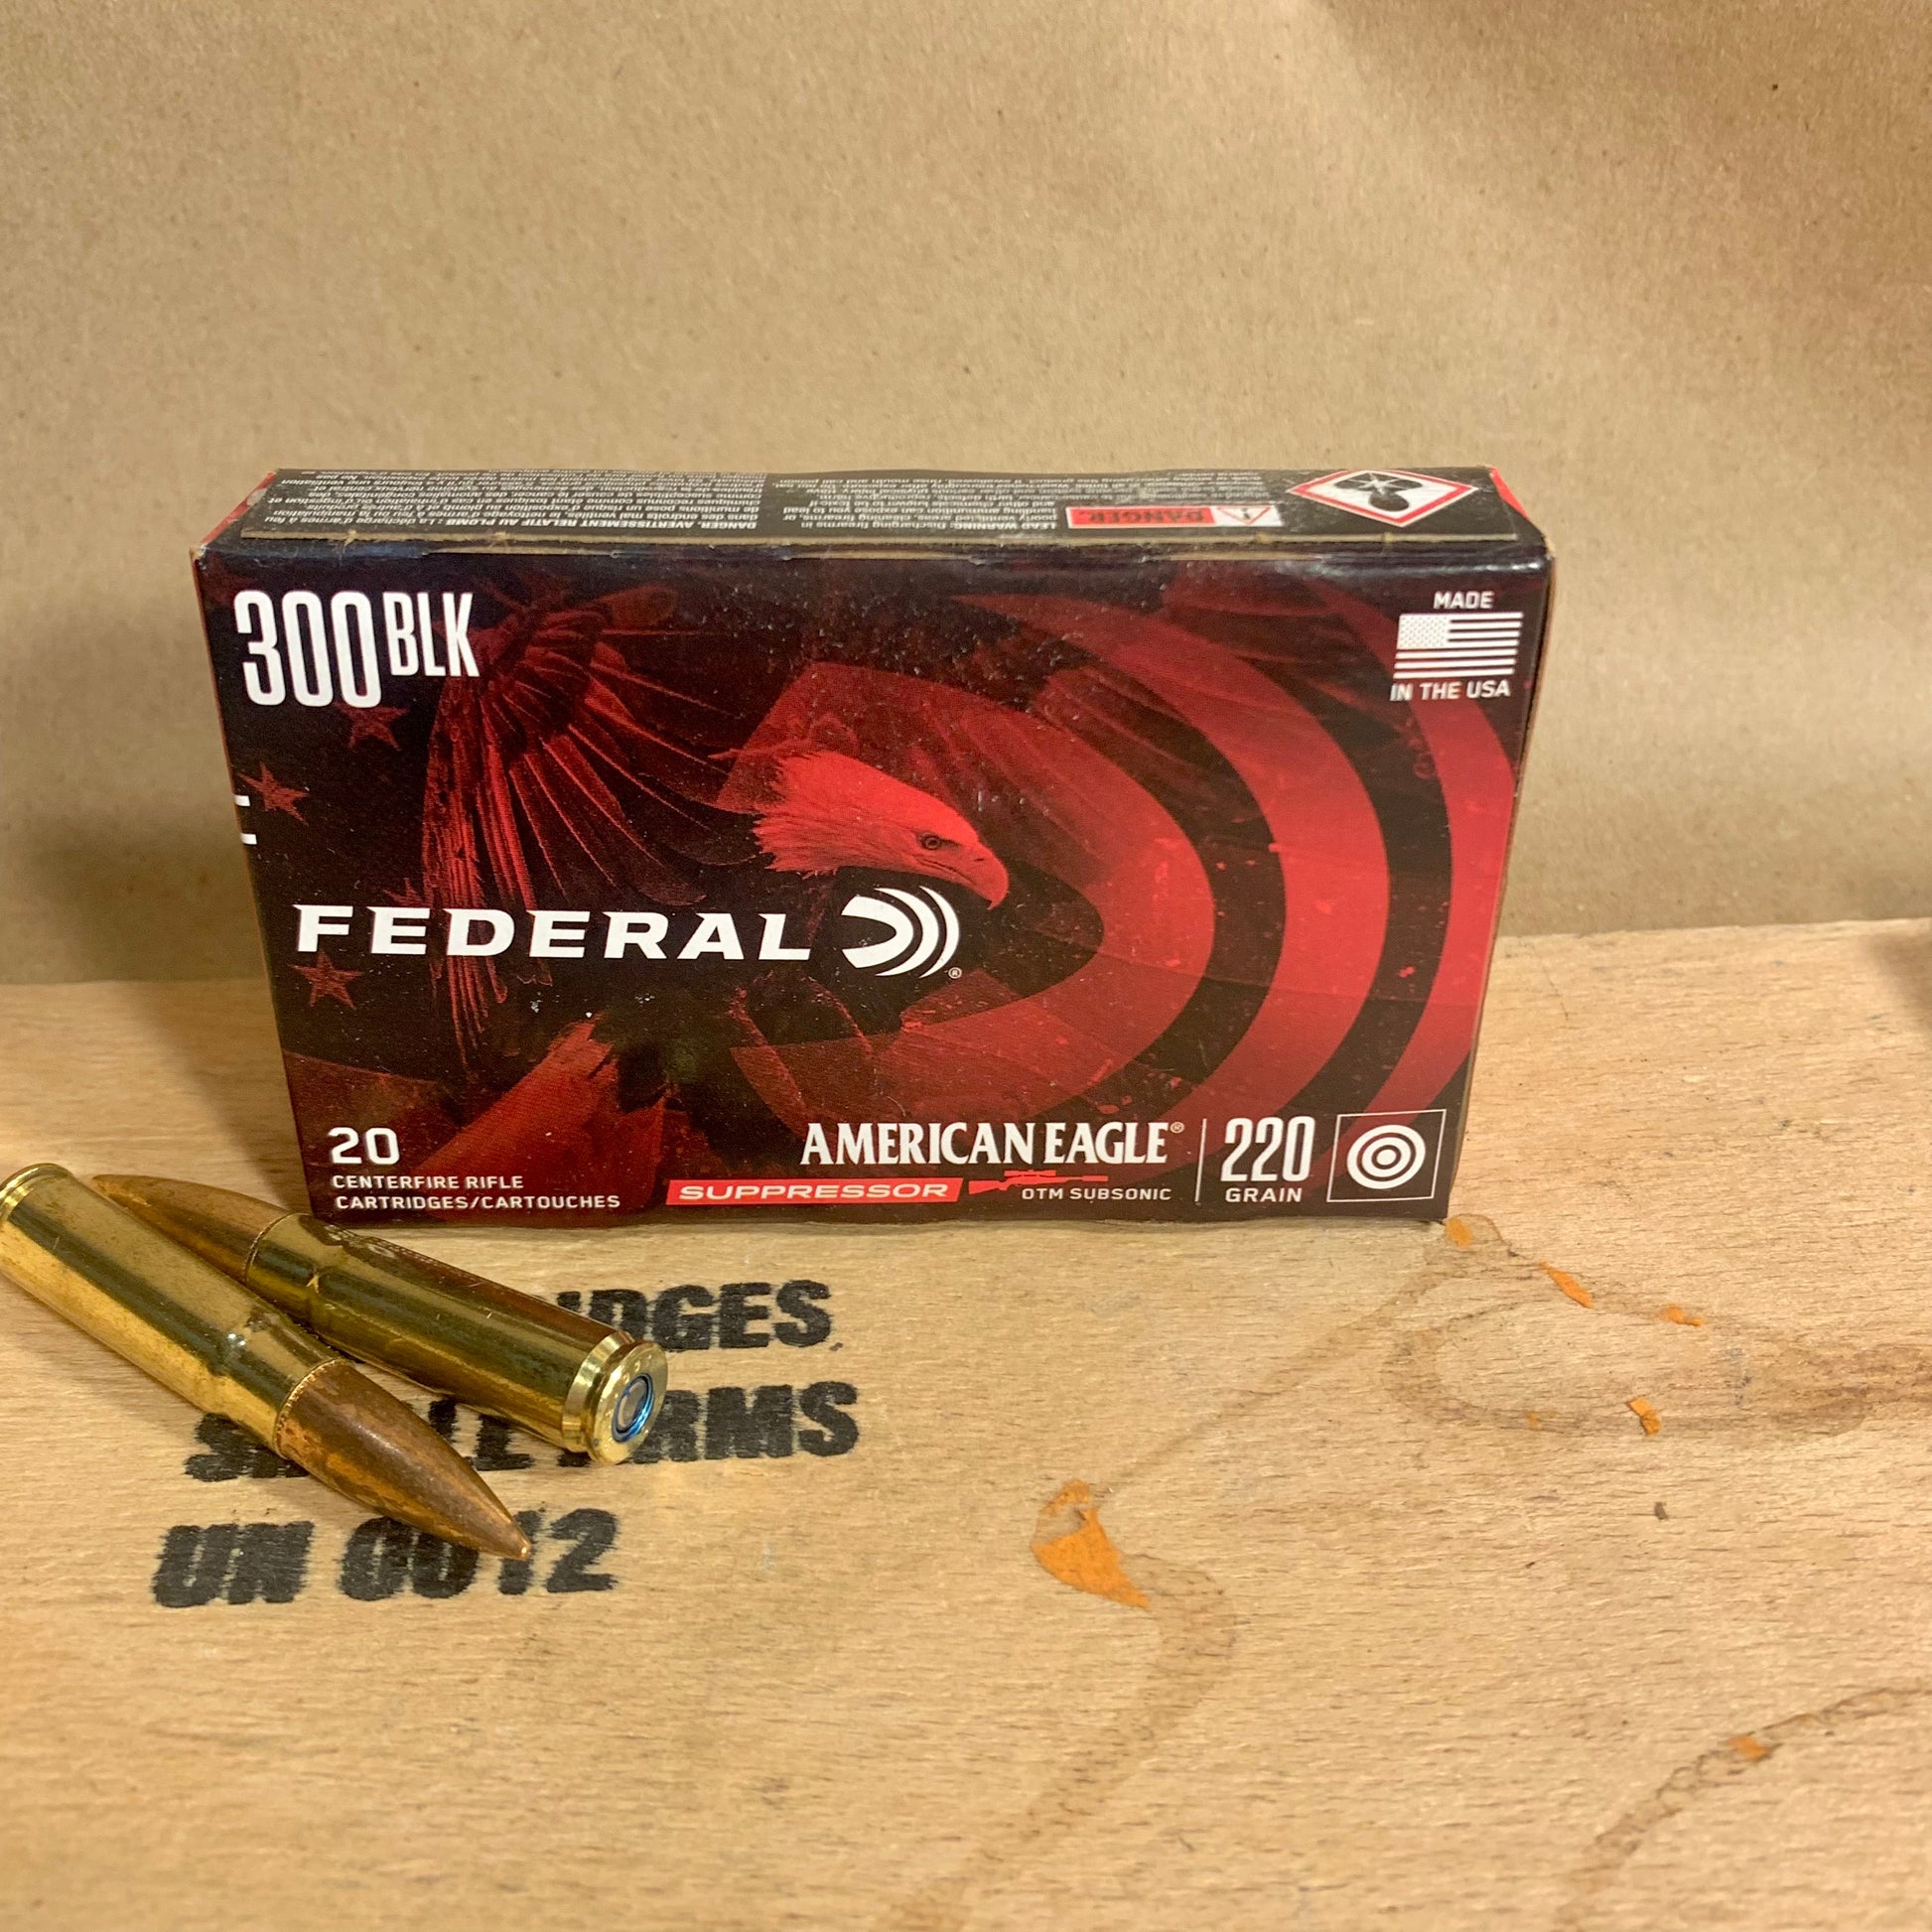 20 Round Box Federal AE SUPPRESSOR .300 AAC Blackout Ammo 220gr OTM Subsonic - AE300BLKSUP2